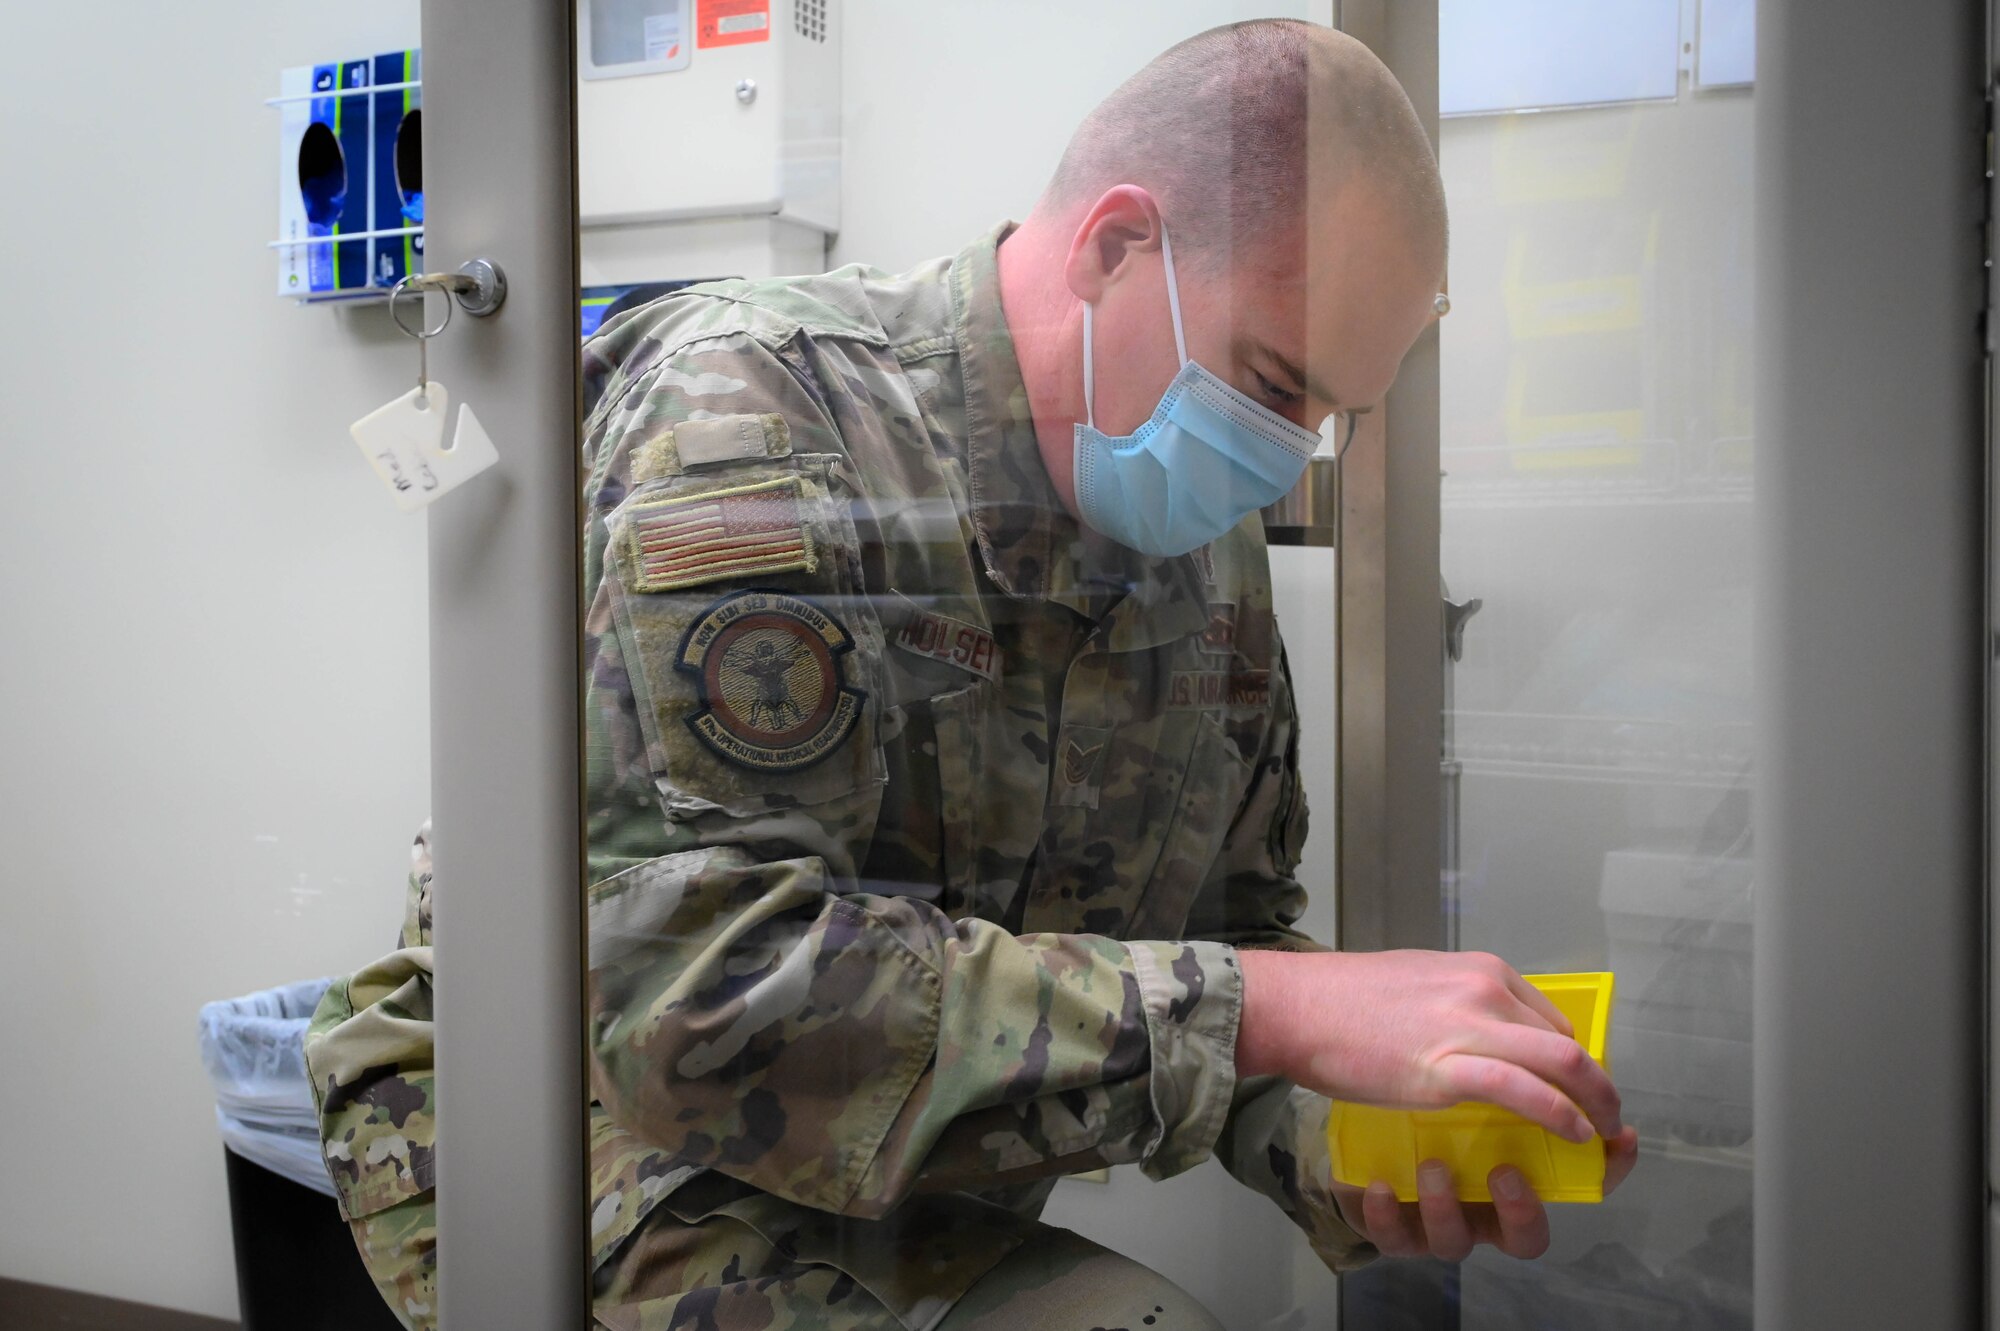 U.S. Air Force Tech. Sgt. Kenneth Holsey, 97th Operational Medical Readiness Squadron flight and operational medical clinic noncommissioned officer in charge, checks inventory at Altus Air Force Base (AAFB), Oklahoma, May 9, 2022. Holsey said his favorite parts of being a medical technician are responding to medical alerts, taking care of aircrew members and enabling the continuation of training for AAFB students. (U.S. Air Force photo Senior Airman Kayla Christenson)